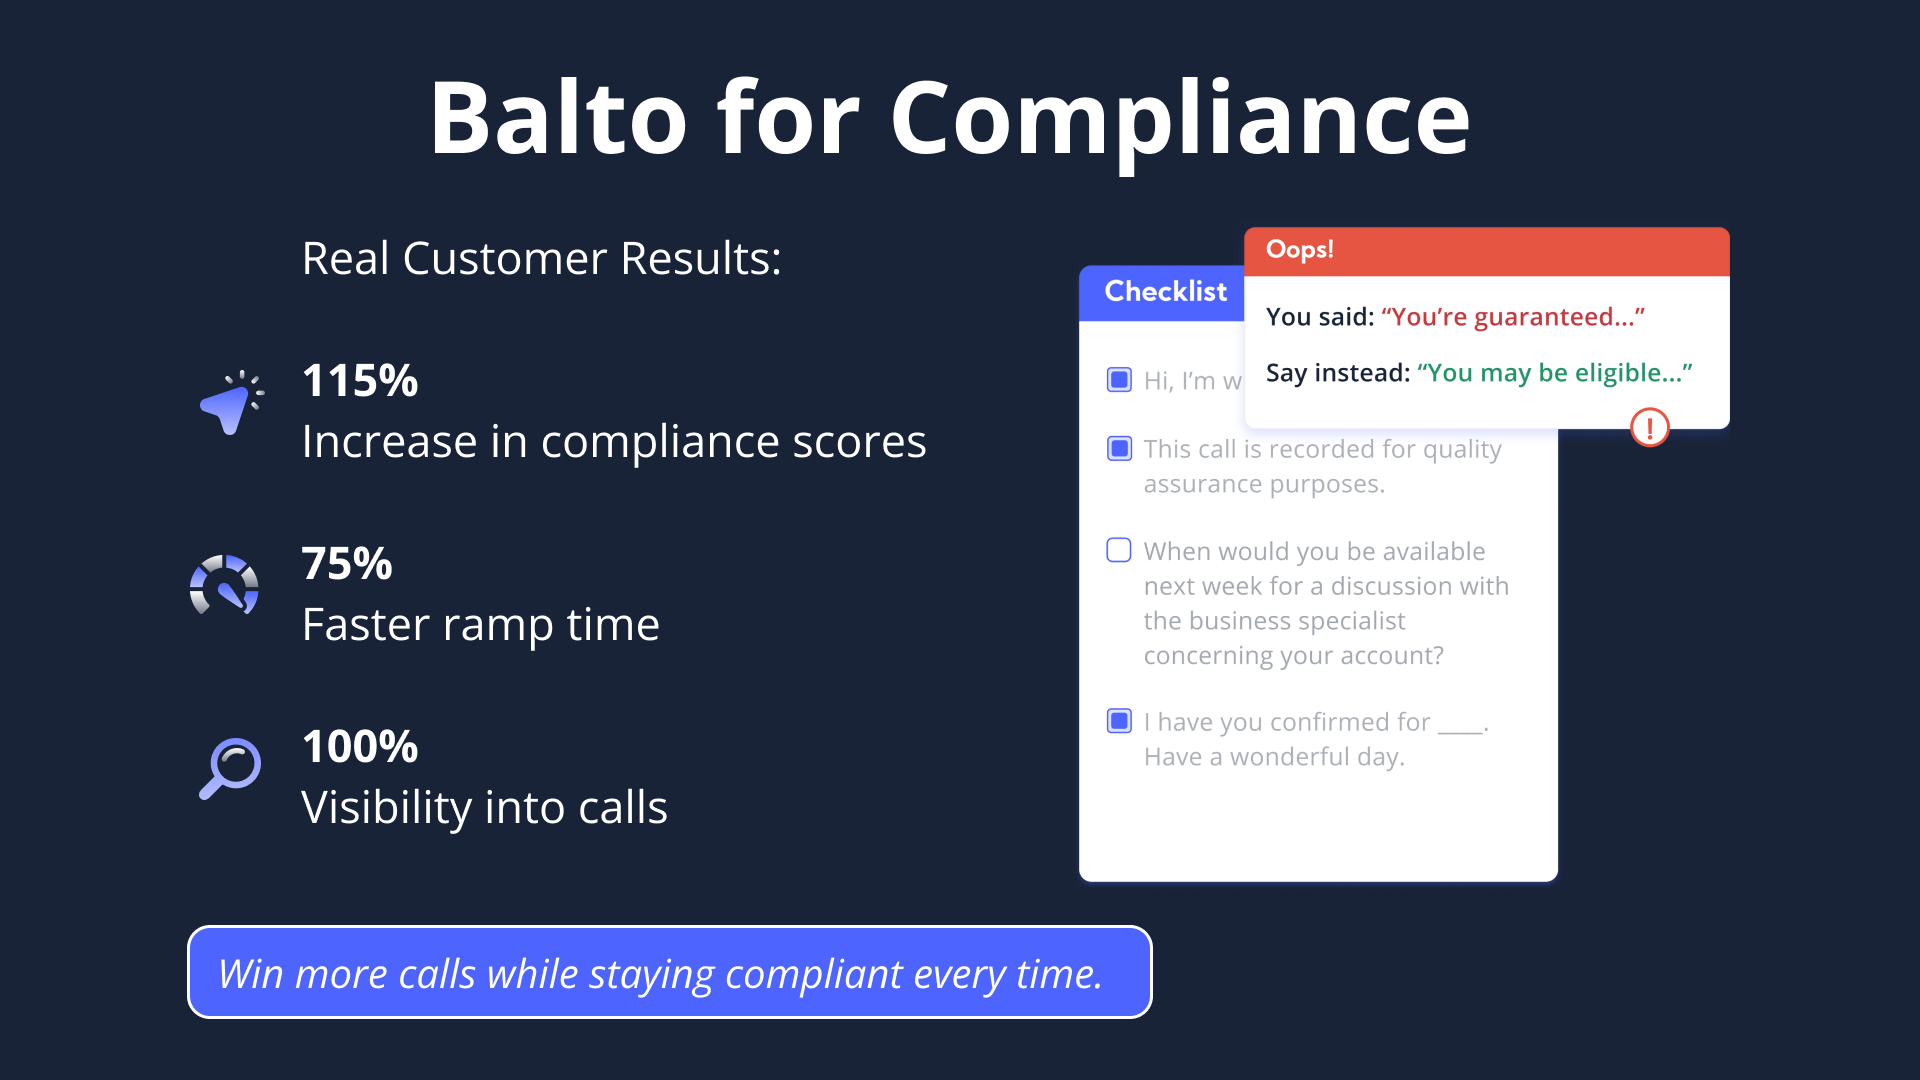 Win more calls while staying compliant every time.